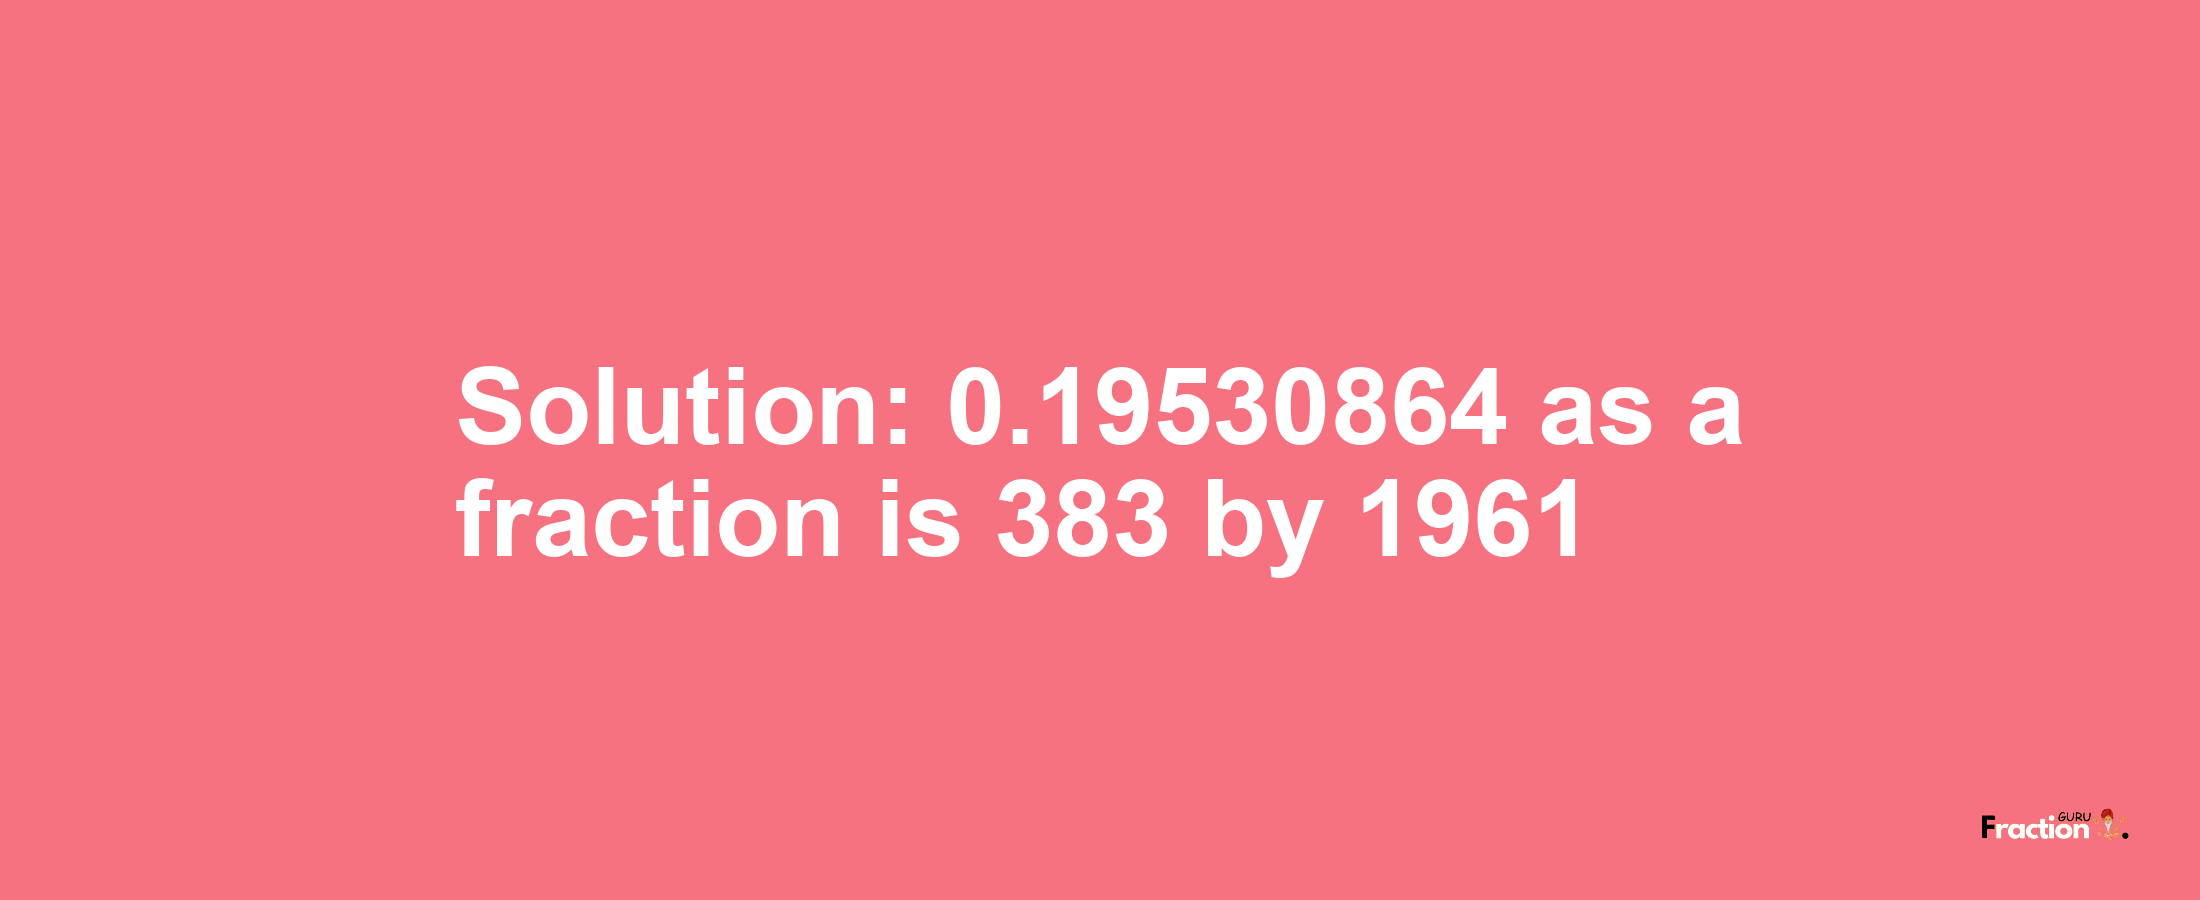 Solution:0.19530864 as a fraction is 383/1961